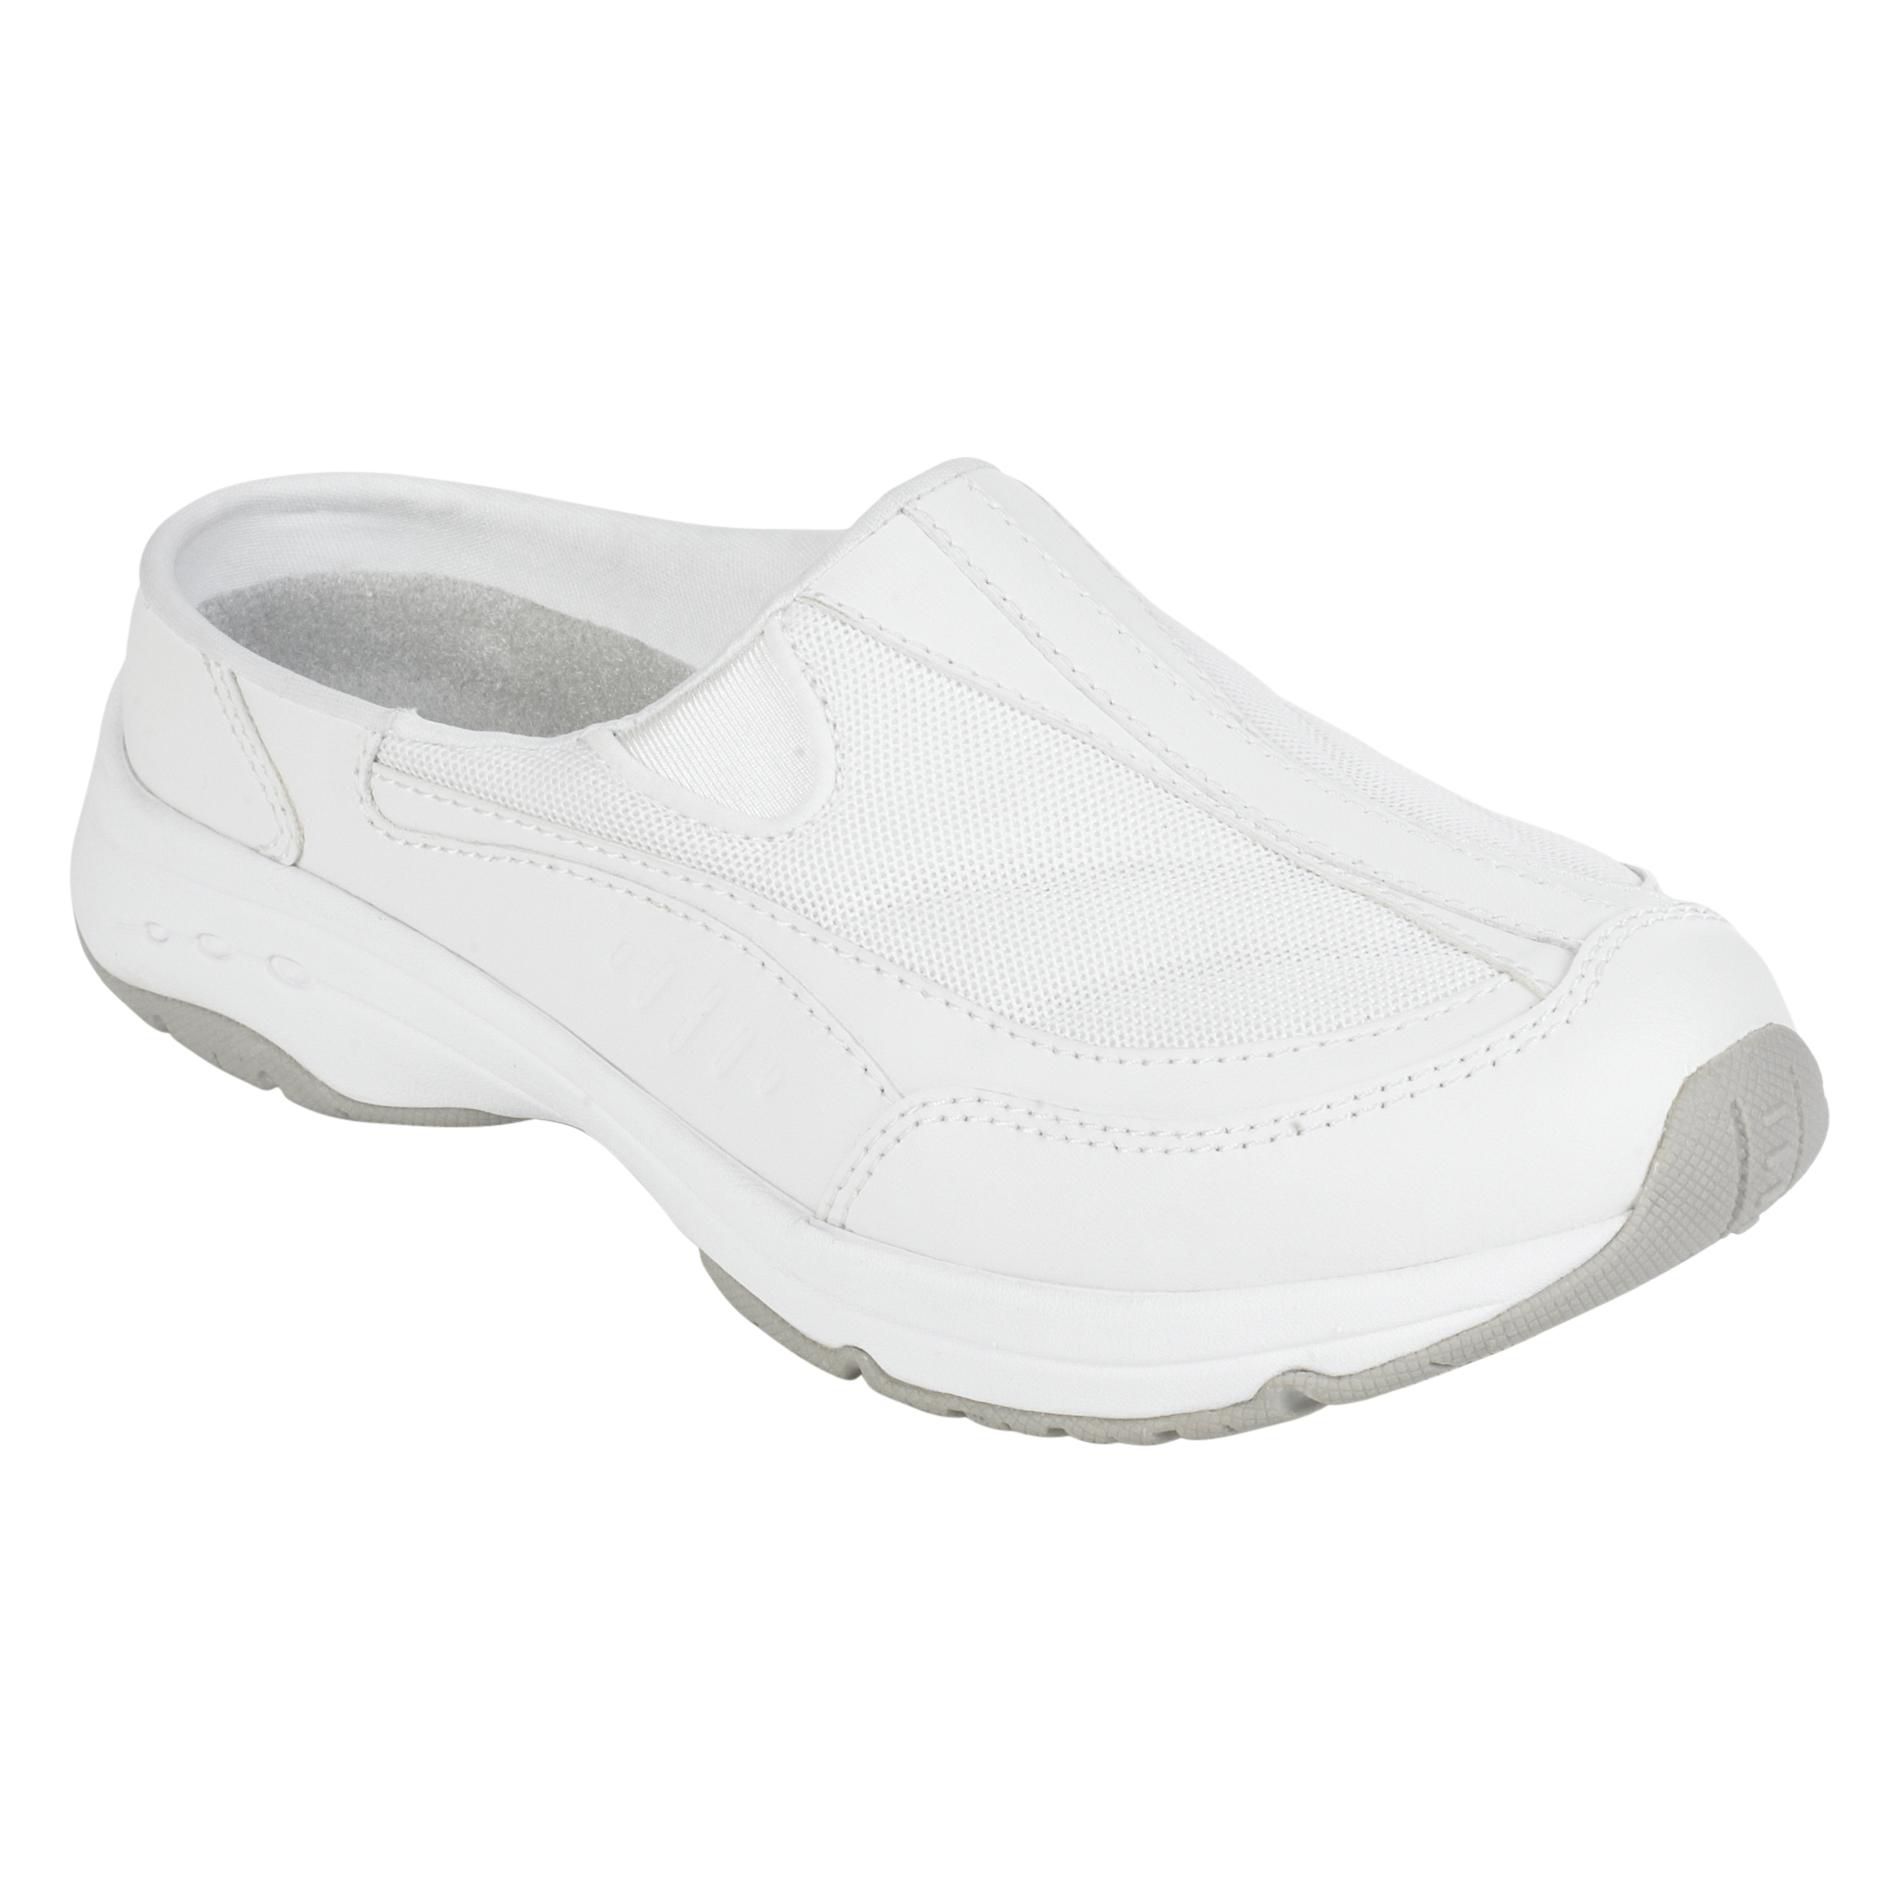 Cobbie Cuddlers Women's See Travel Mule Wide Width - White - Shoes ...